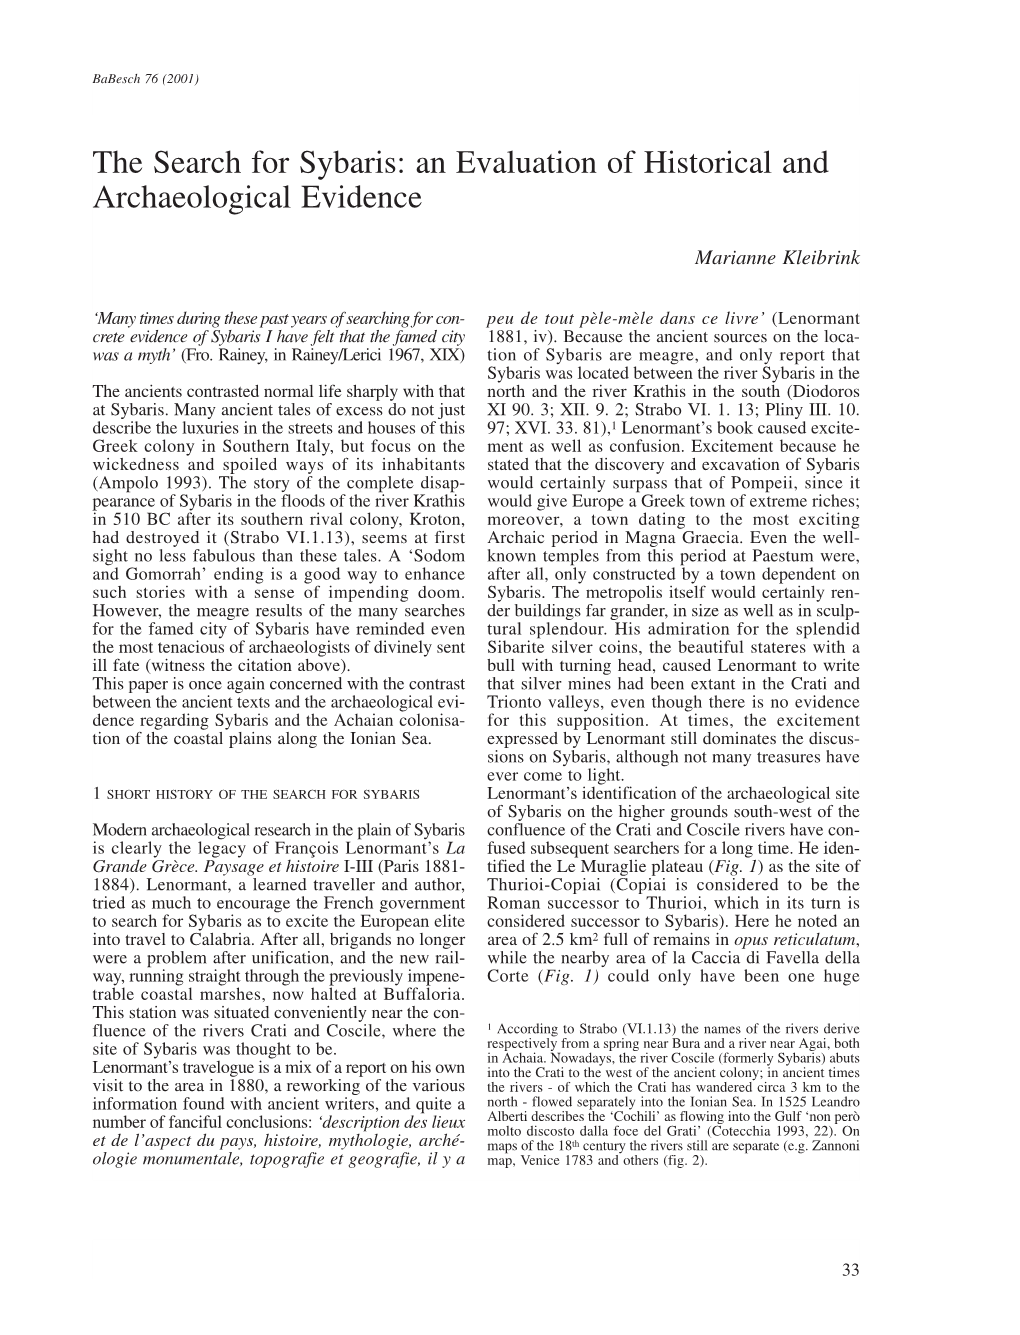 The Search for Sybaris: an Evaluation of Historical and Archaeological Evidence